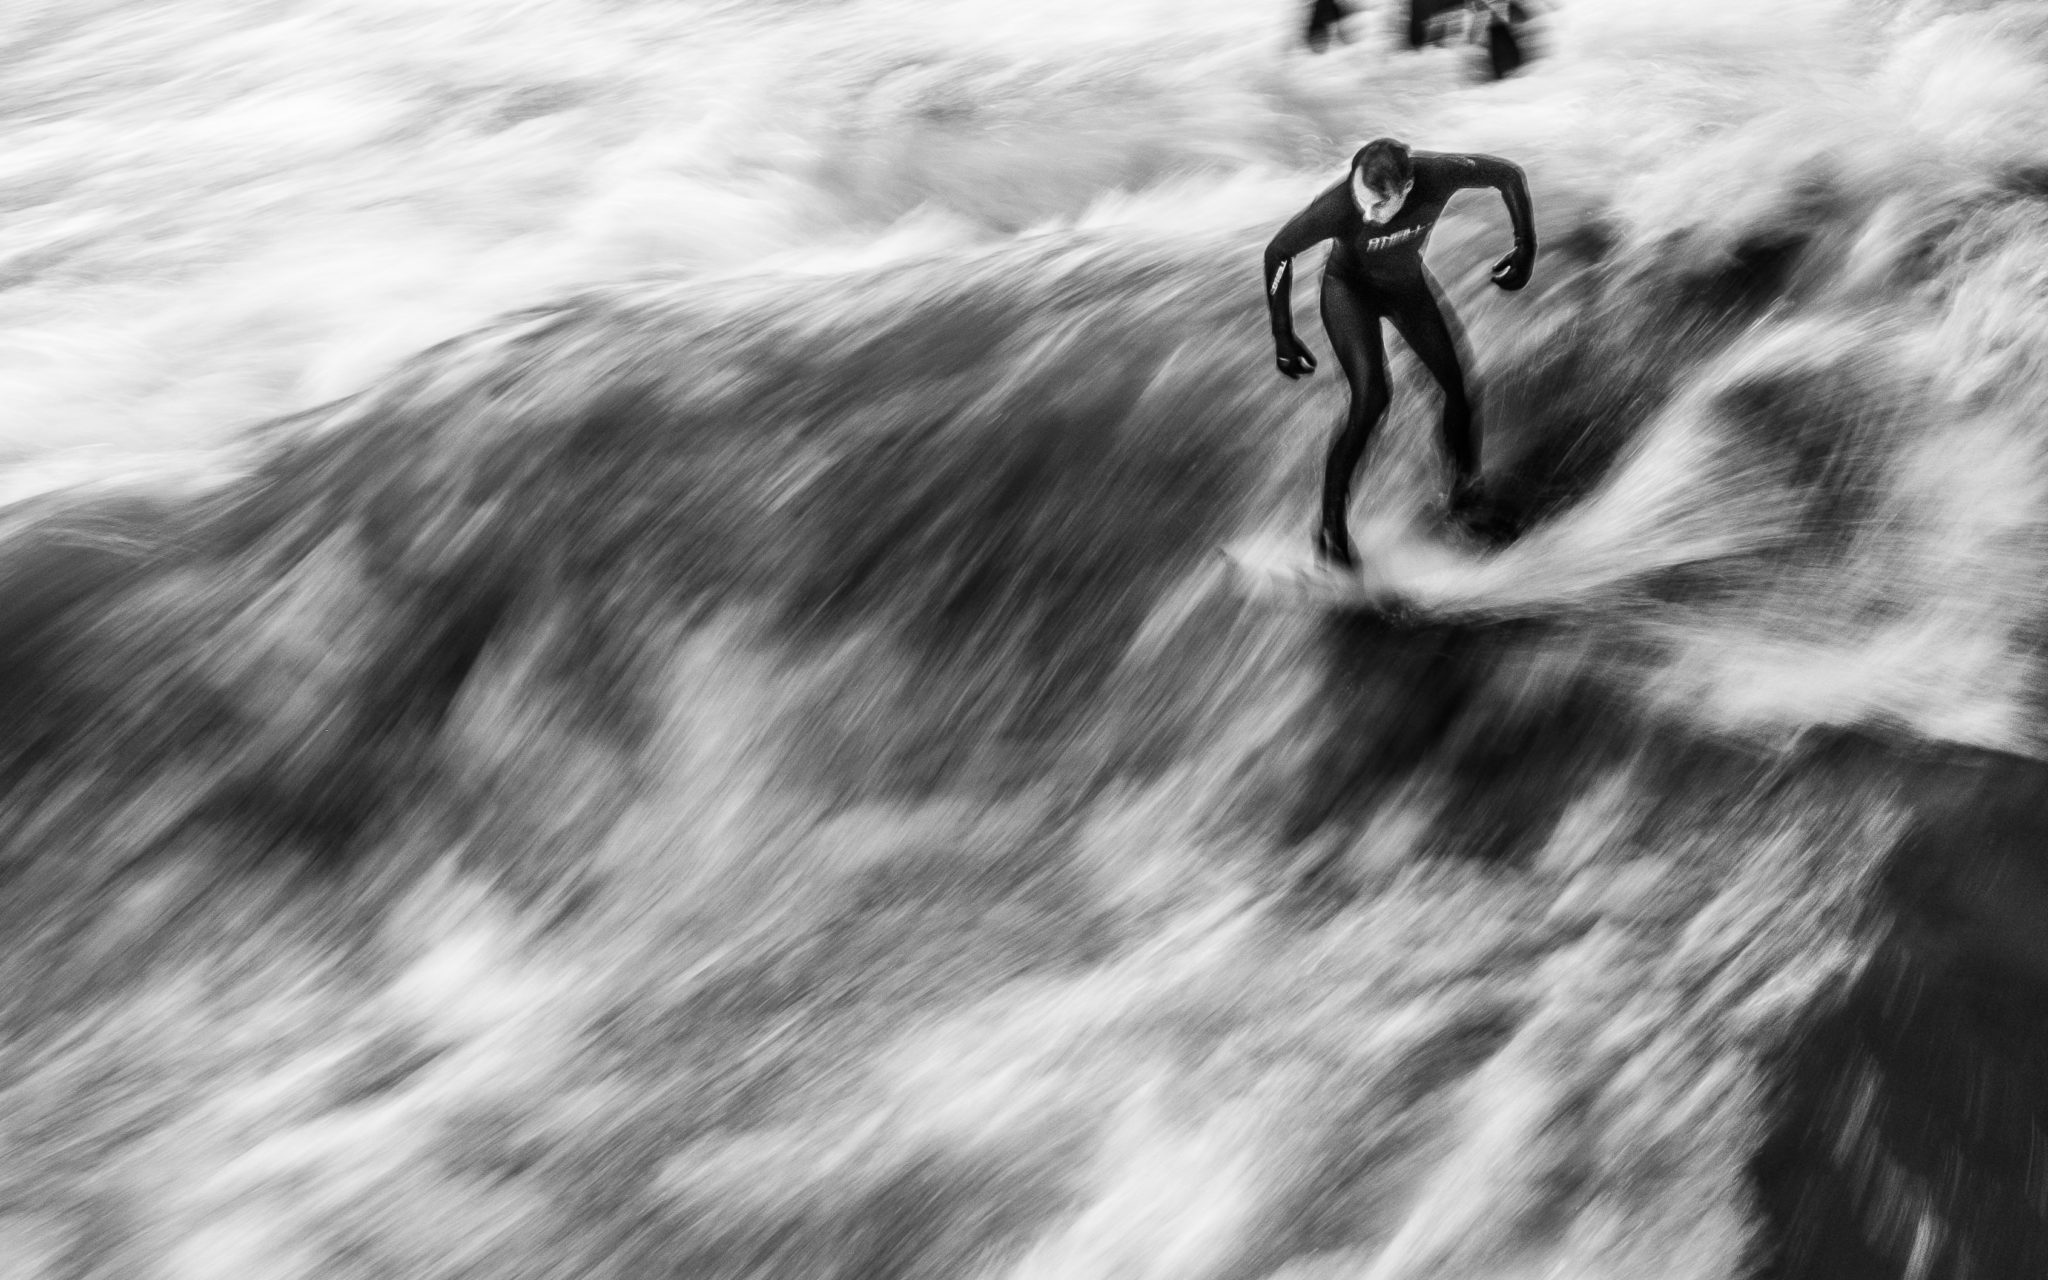 Skander Khlif’s Black and White Images of The Surfers of Munich